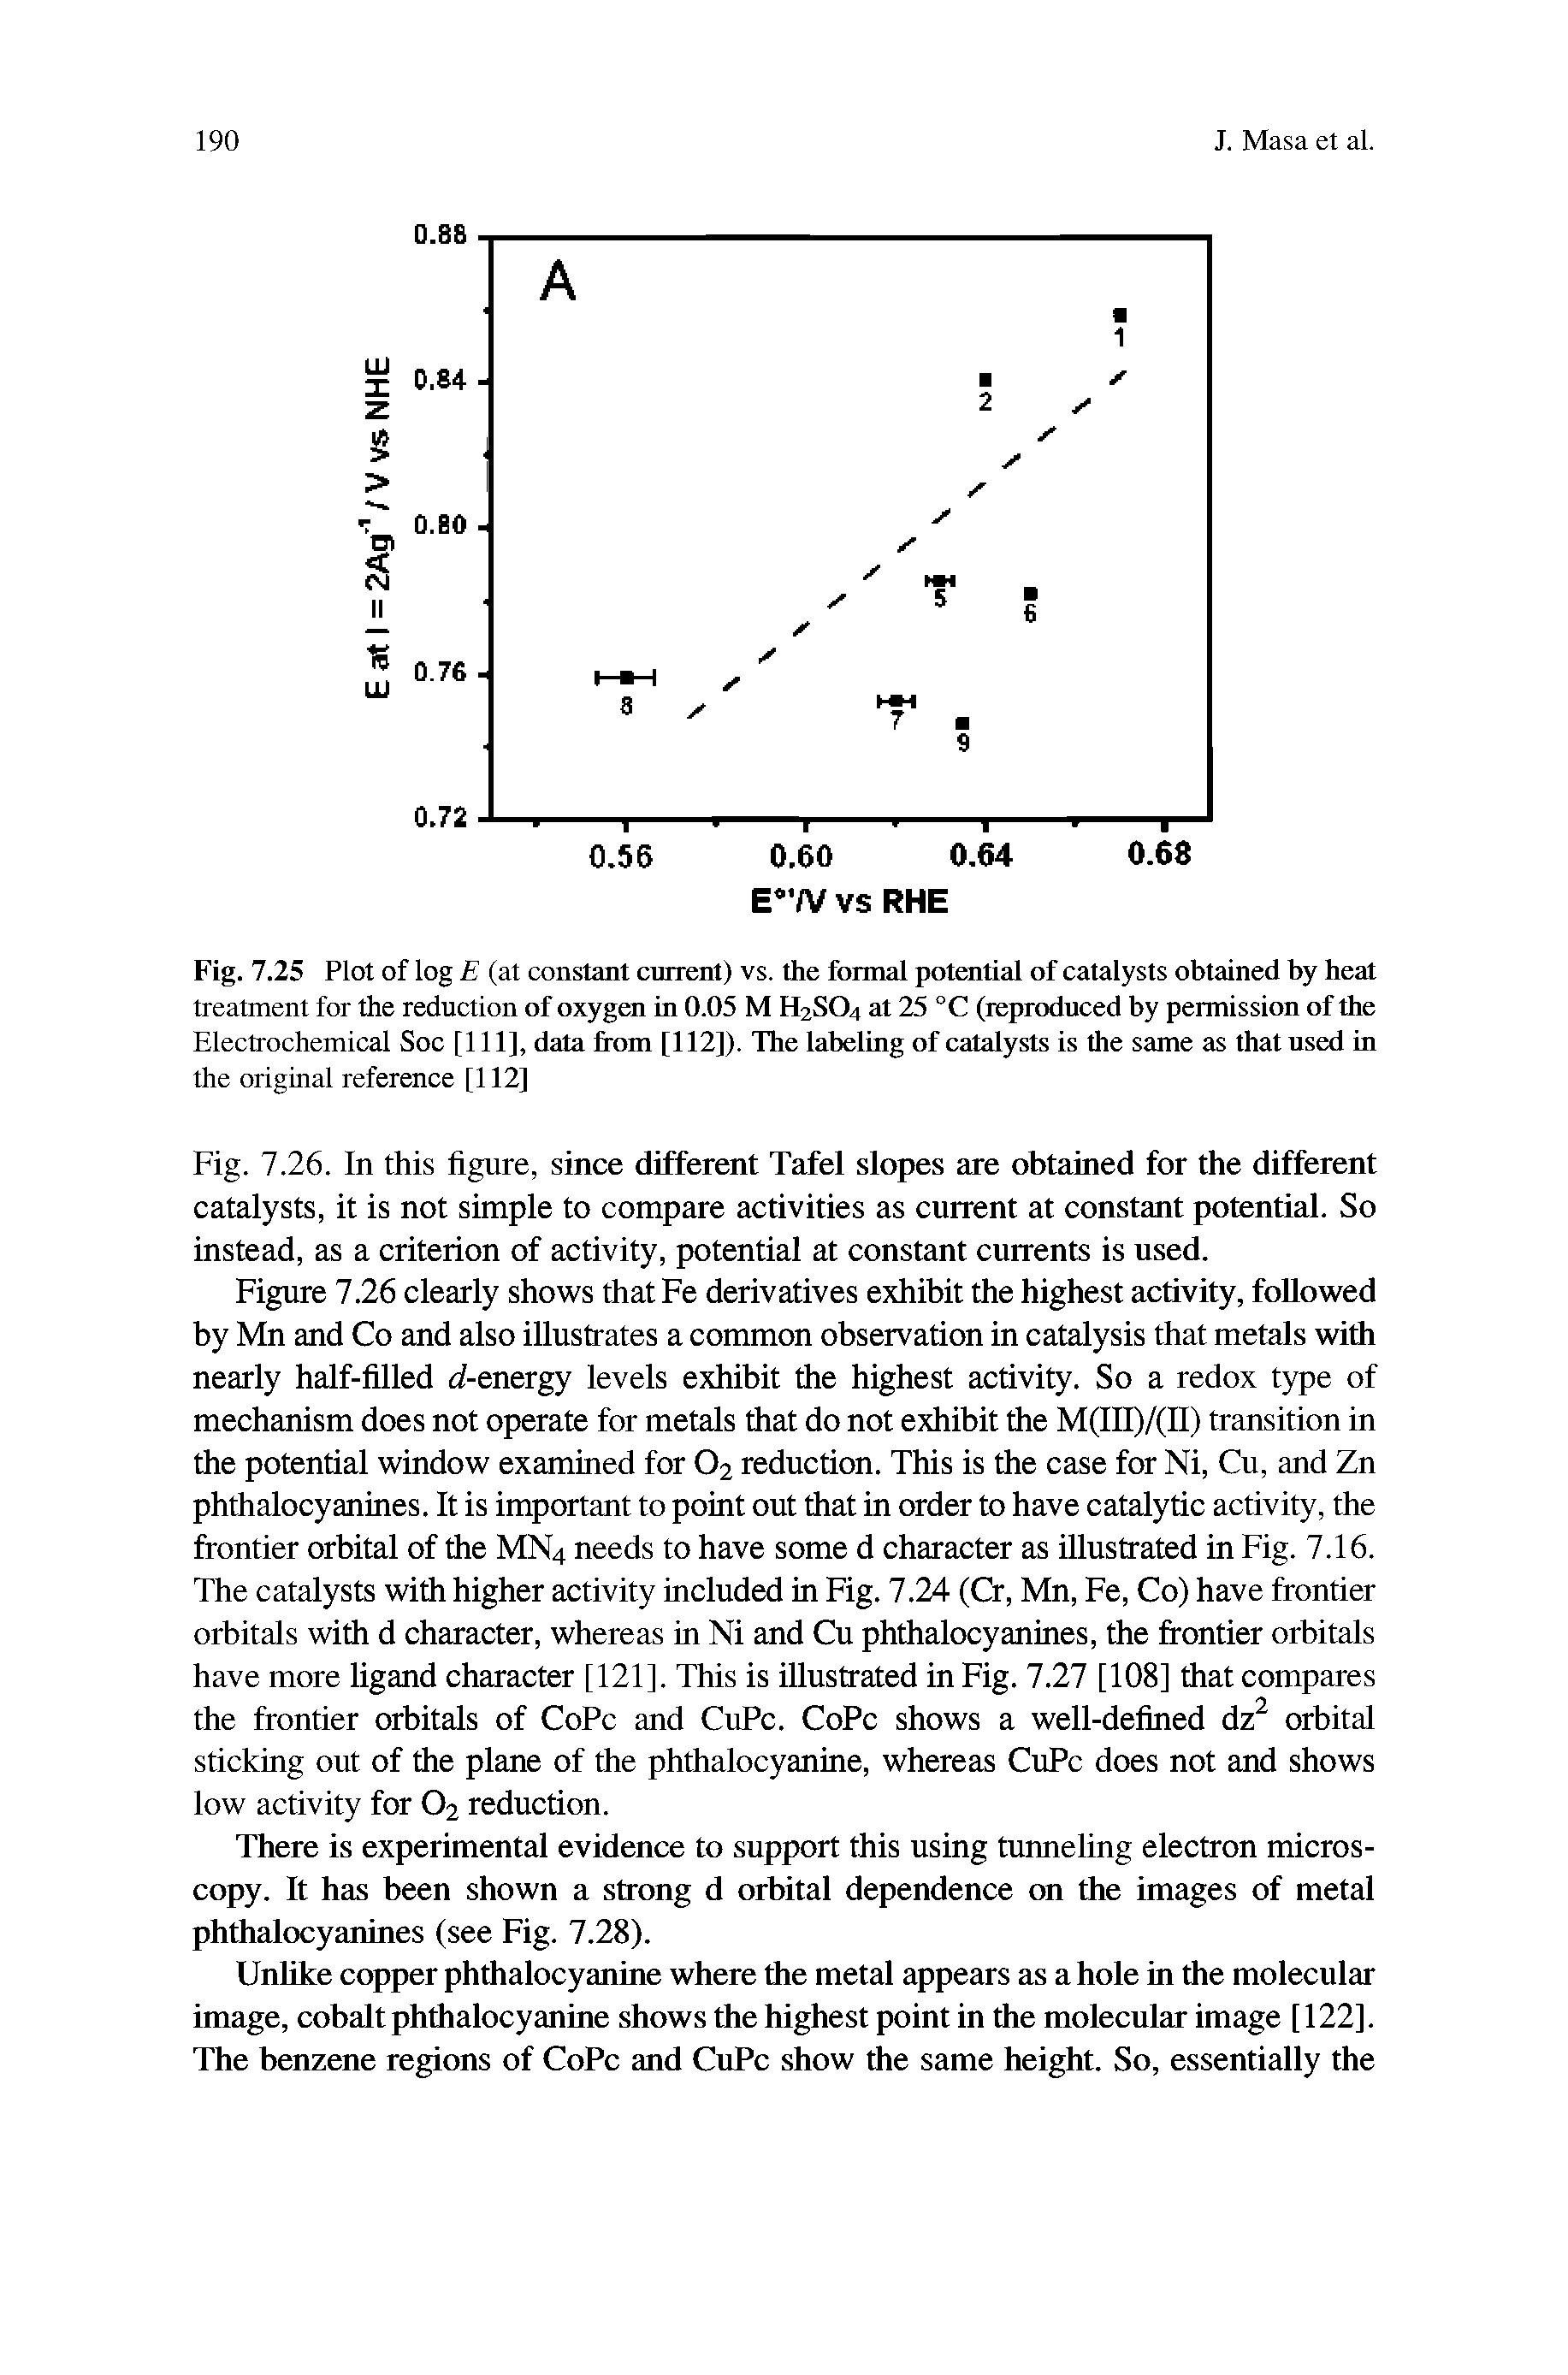 Figure 7.26 clearly shows thatFe derivatives exhibit the highest activity, followed by Mn and Co and also illustrates a common observation in catalysis that metals with nearly half-filled d-energy levels exhibit the highest activity. So a redox type of mechanism does not operate for metals that do not exhibit the M(III)/(II) transition in the potential window examined for O2 reduction. This is the case for Ni, Cu, and Zn phthalocyanines. It is important to point out that in order to have catalytic activity, the frontier orbital of the MN4 needs to have some d character as illustrated in Fig. 7.16. The catalysts with higher activity included in Fig. 7.24 (Cr, Mn, Fe, Co) have frontier orbitals with d character, whereas in Ni and Cu phthalocyanines, the frontier orbitals have more ligand character [121]. This is illustrated in Fig. 7.27 [108] that compares the frontier orbitals of CoPc and CuPc. CoPc shows a well-defined dz orbital sticking out of the plane of the phthalocyanine, whereas CuPc does not and shows low activity for O2 reduction.